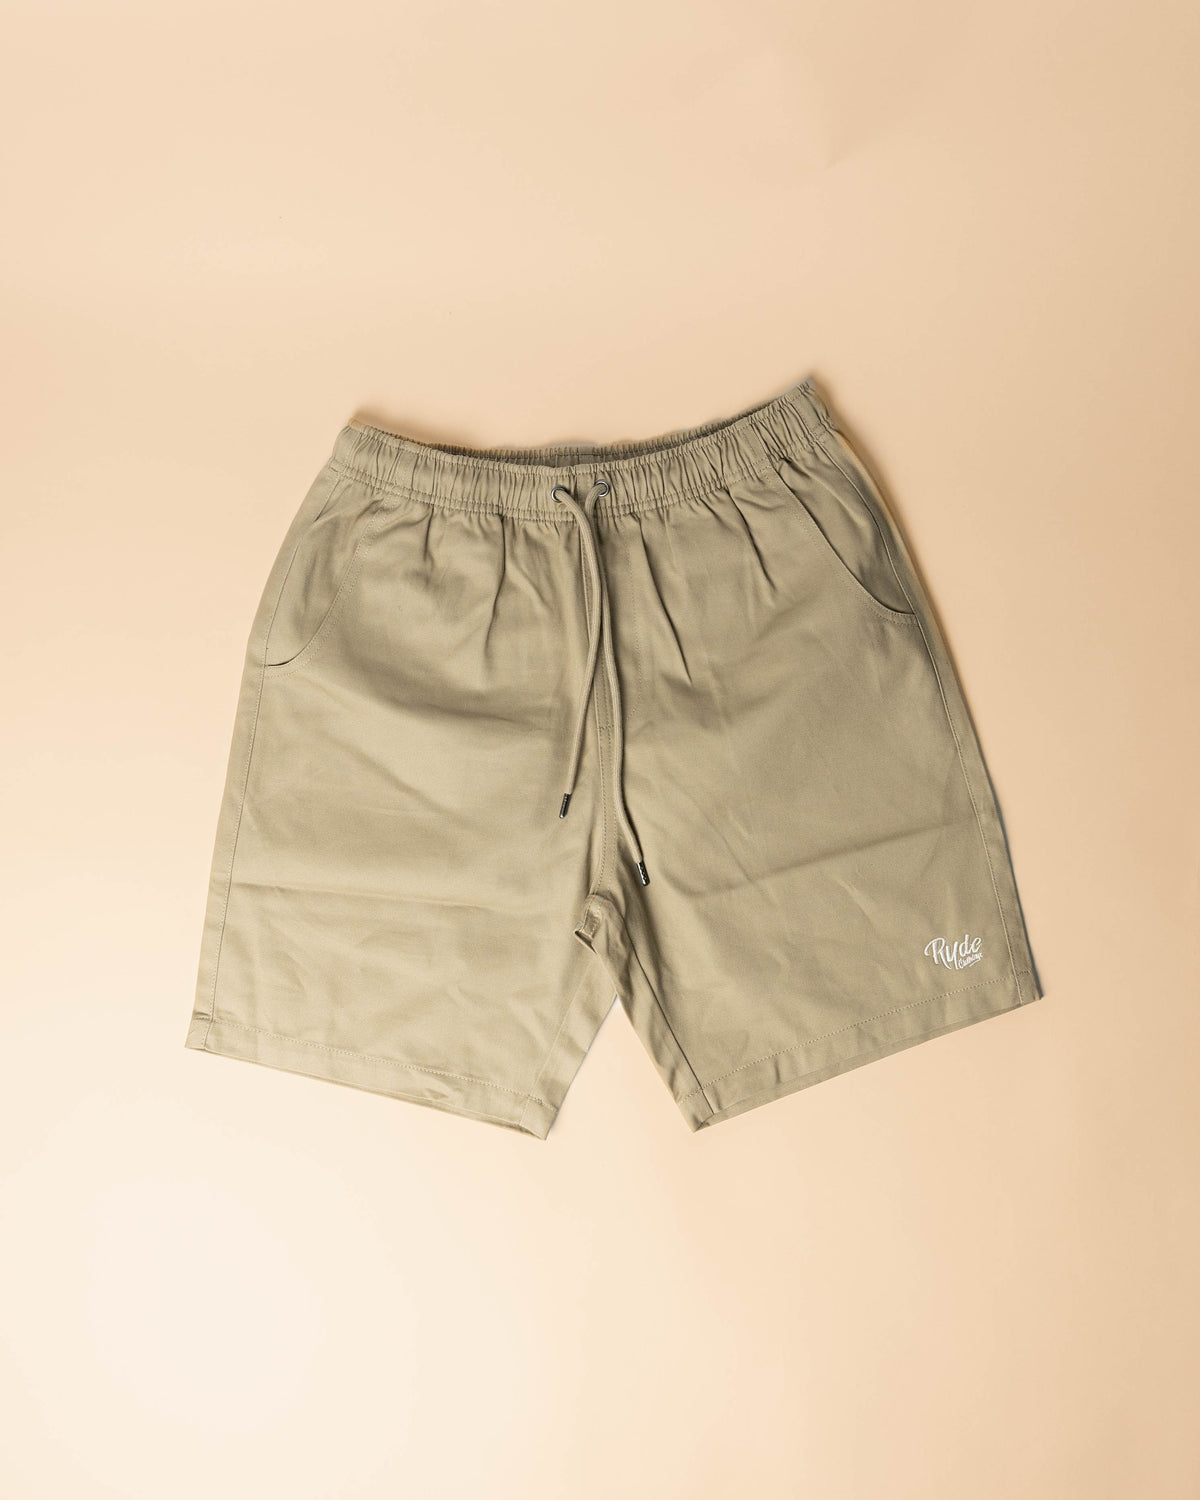 Embroidered Walk Shorts